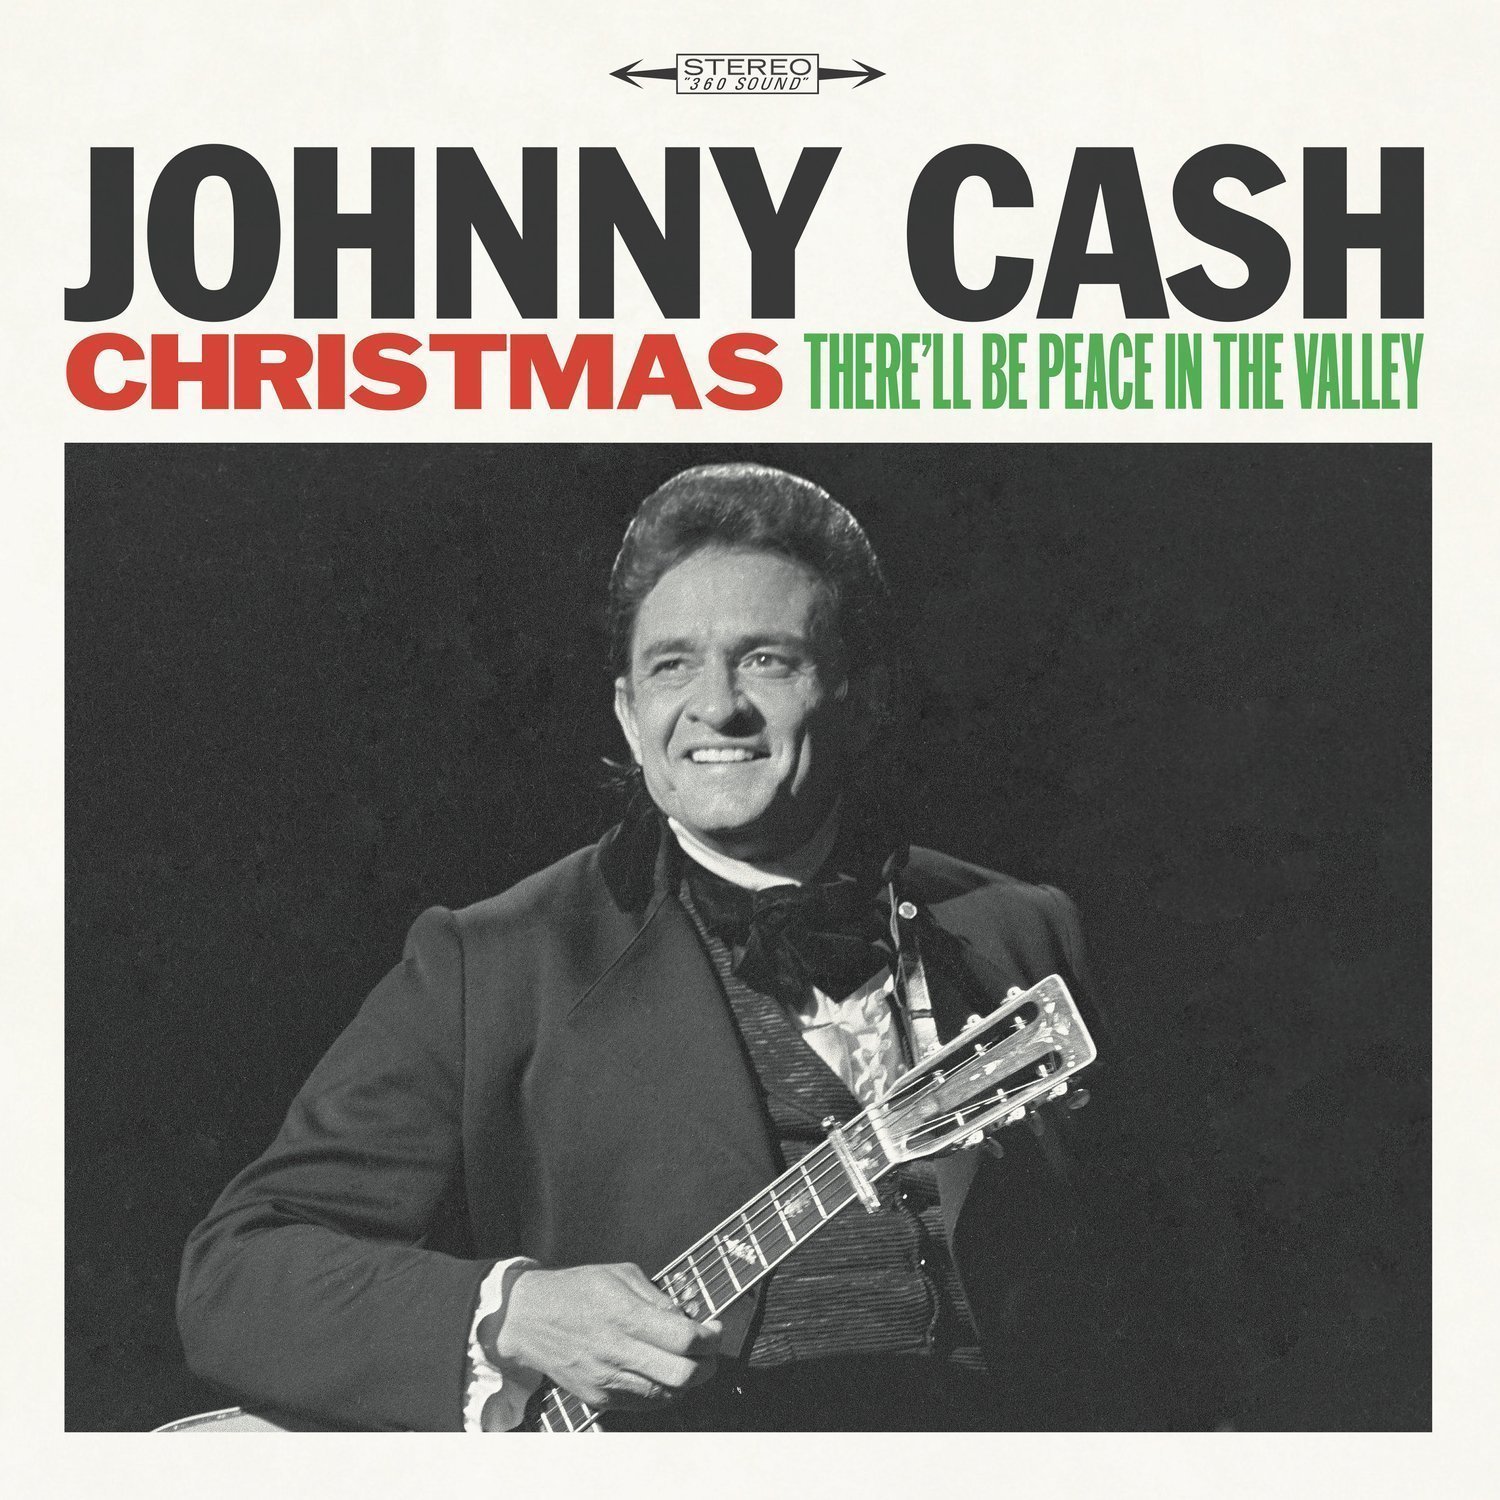 LP Johnny Cash Christmas: There'll Be Peace In the Valley (LP)